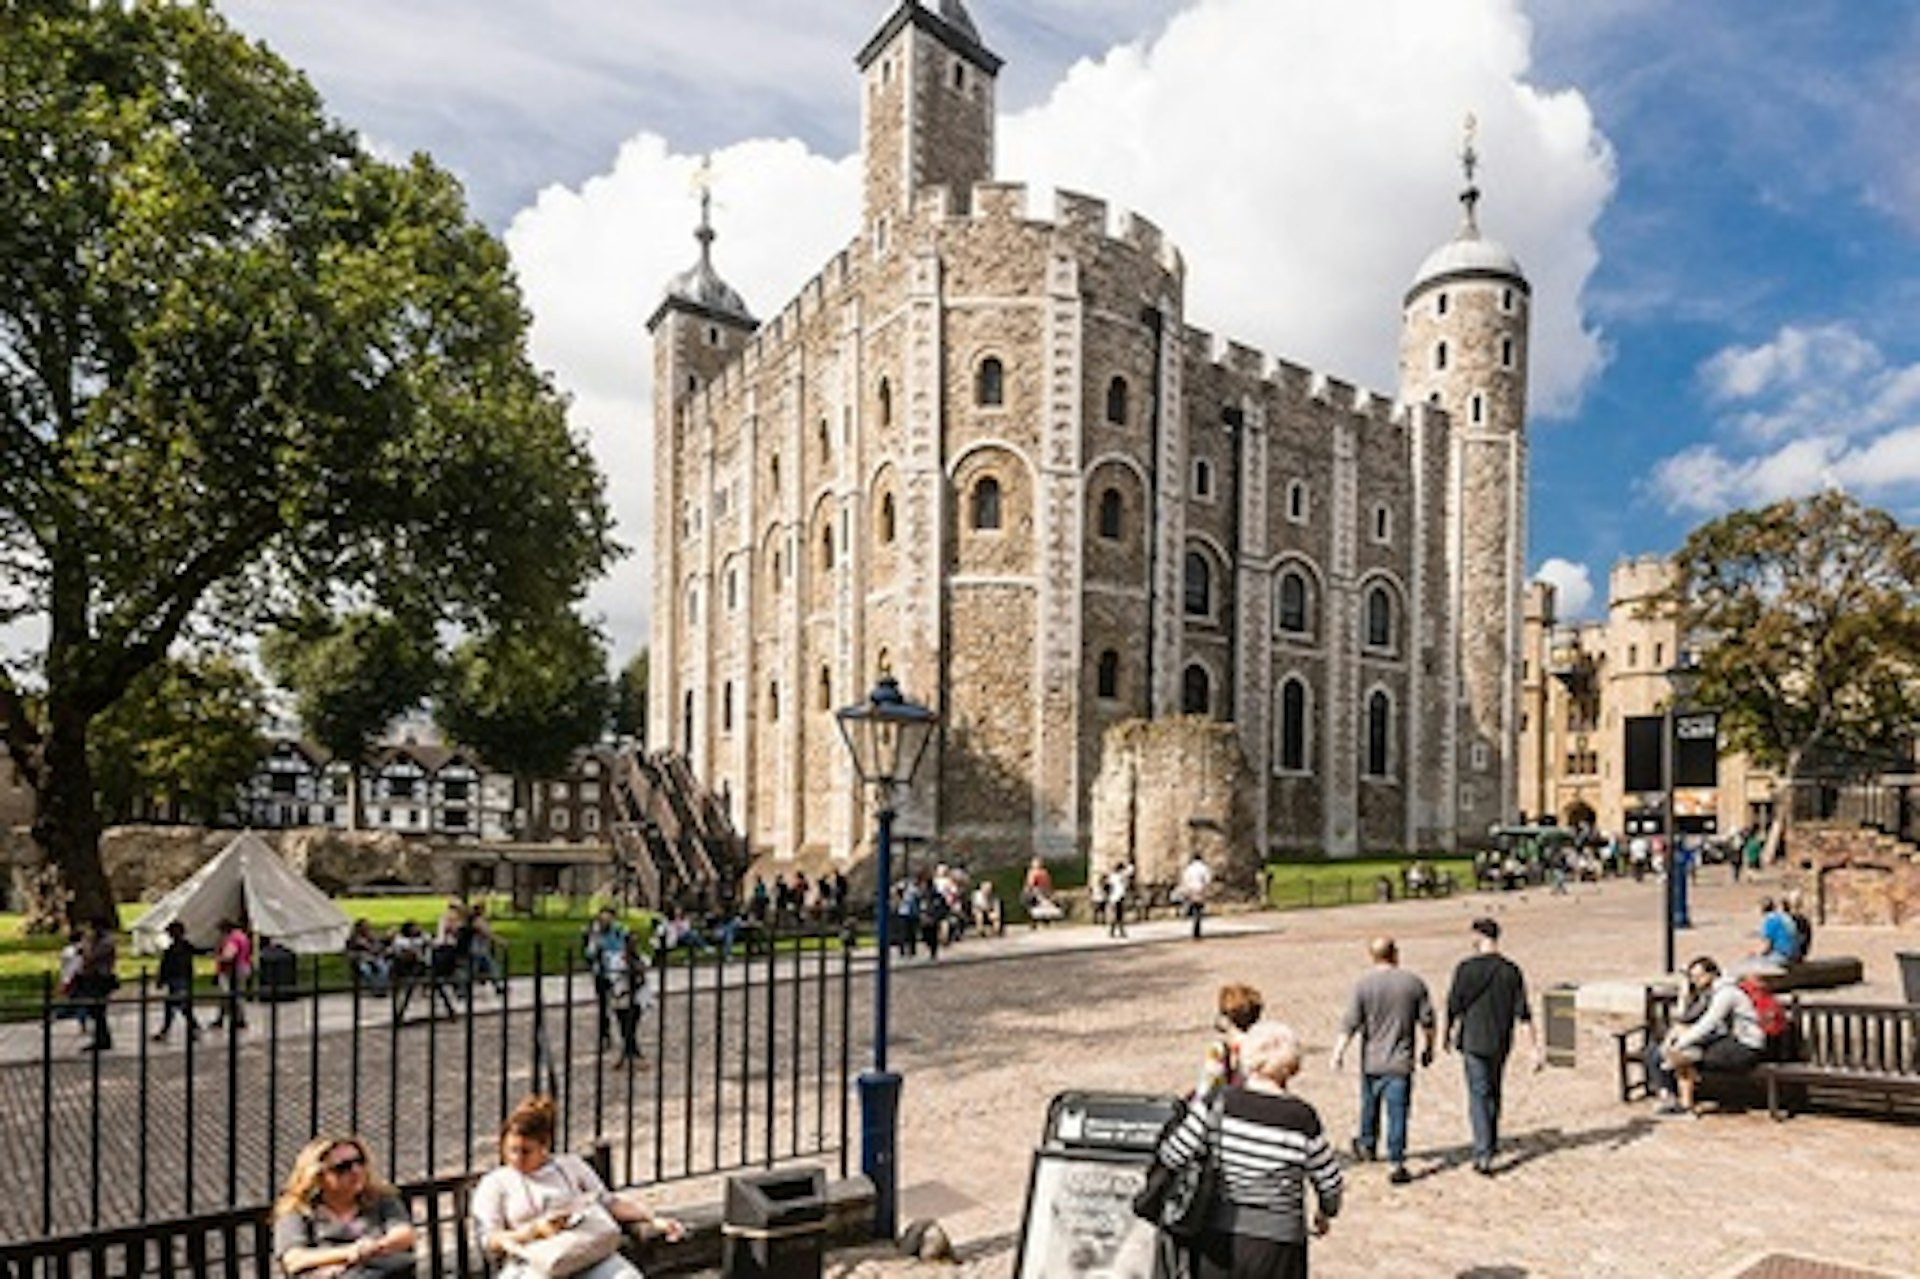 Visit the Tower of London for One Adult and One Child 1